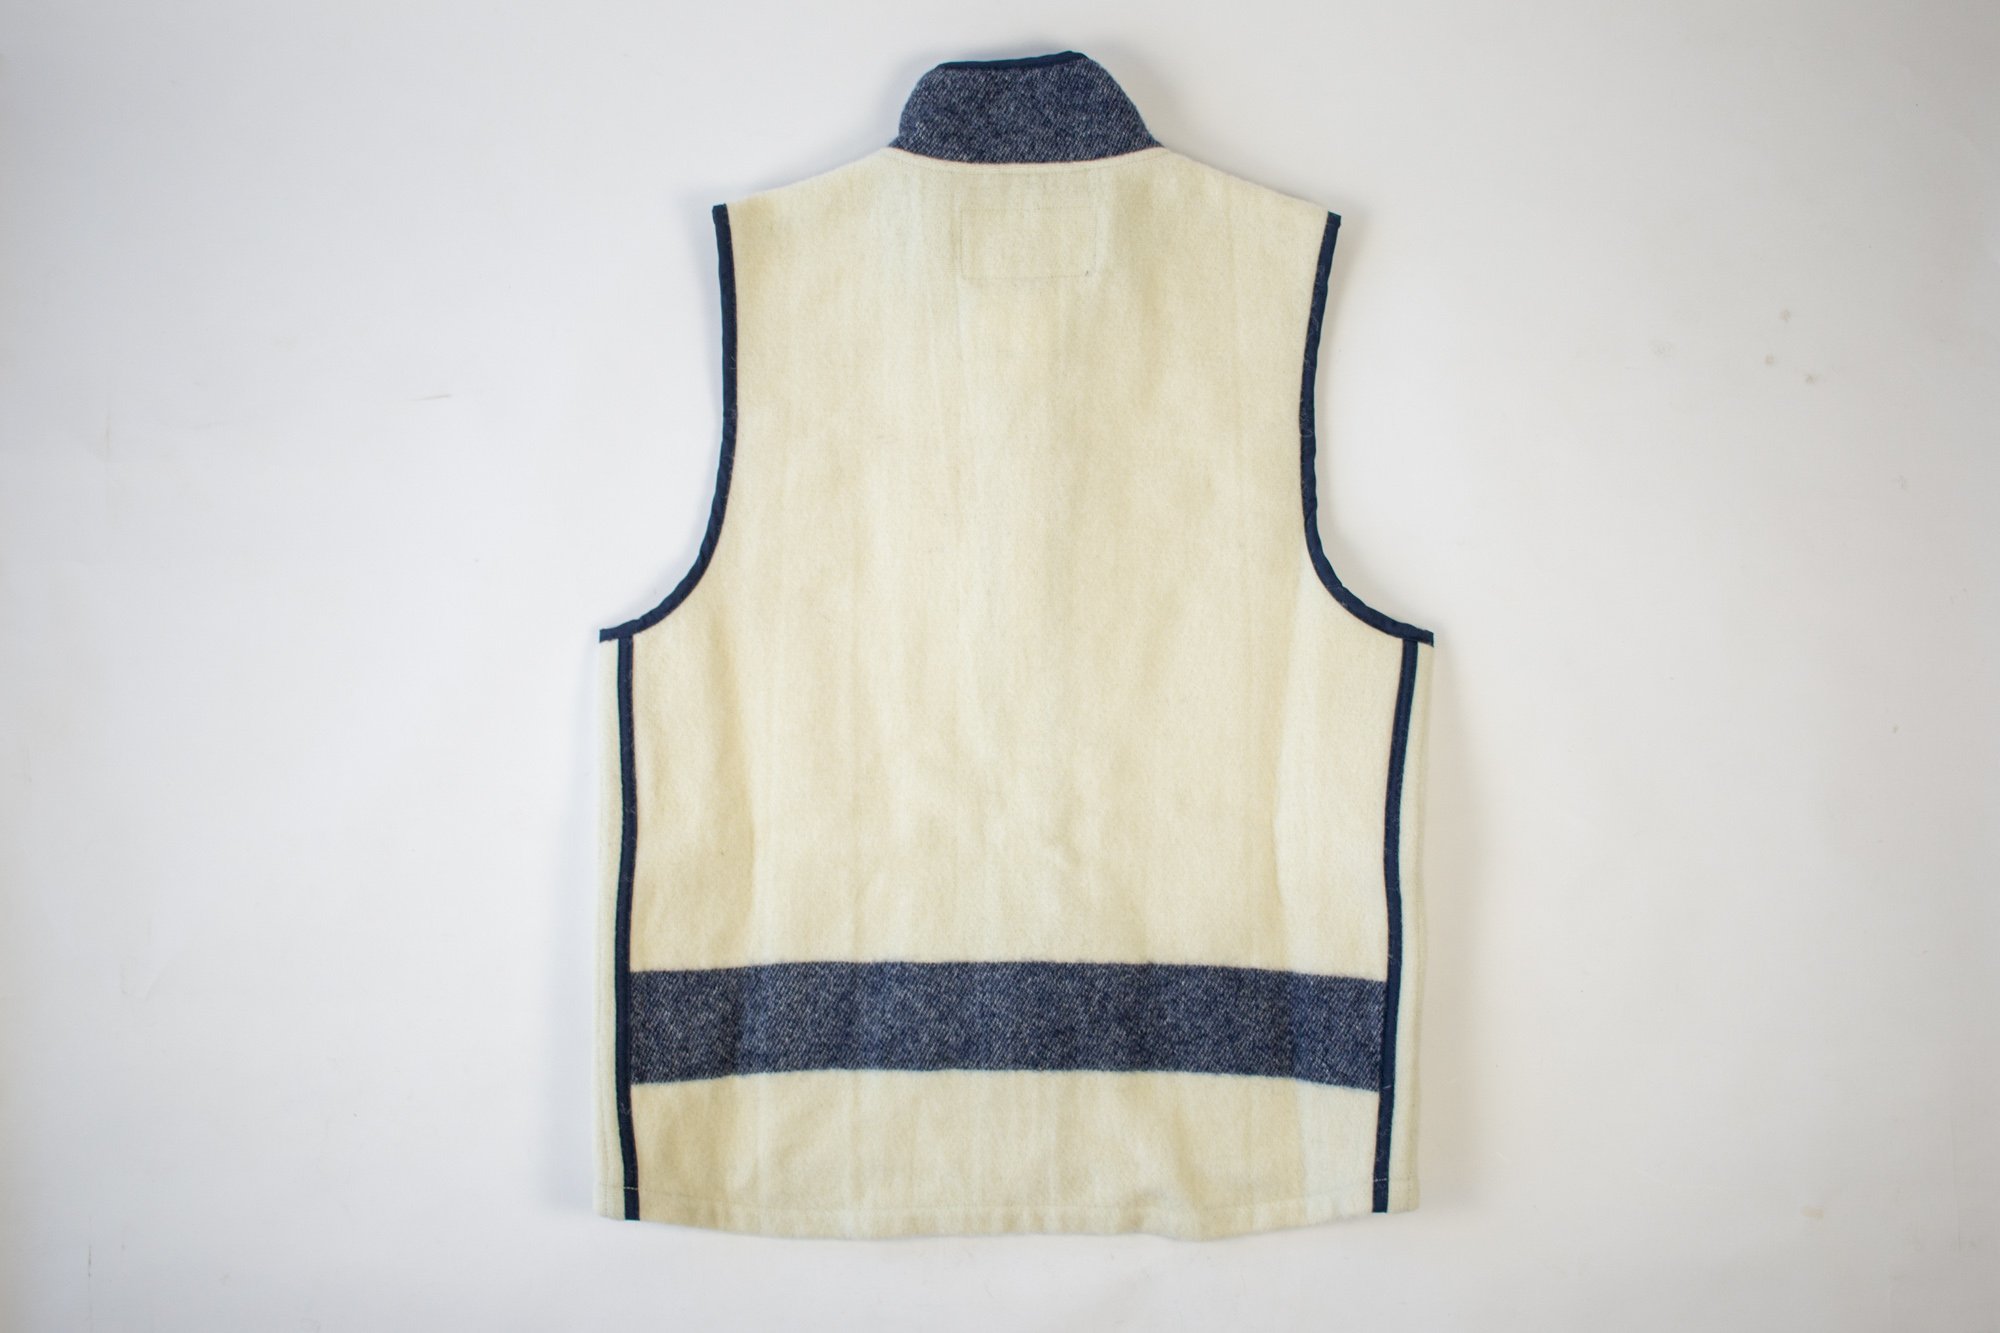 A Fair Deal on Faribault Woolen Mills Blankets and Vests